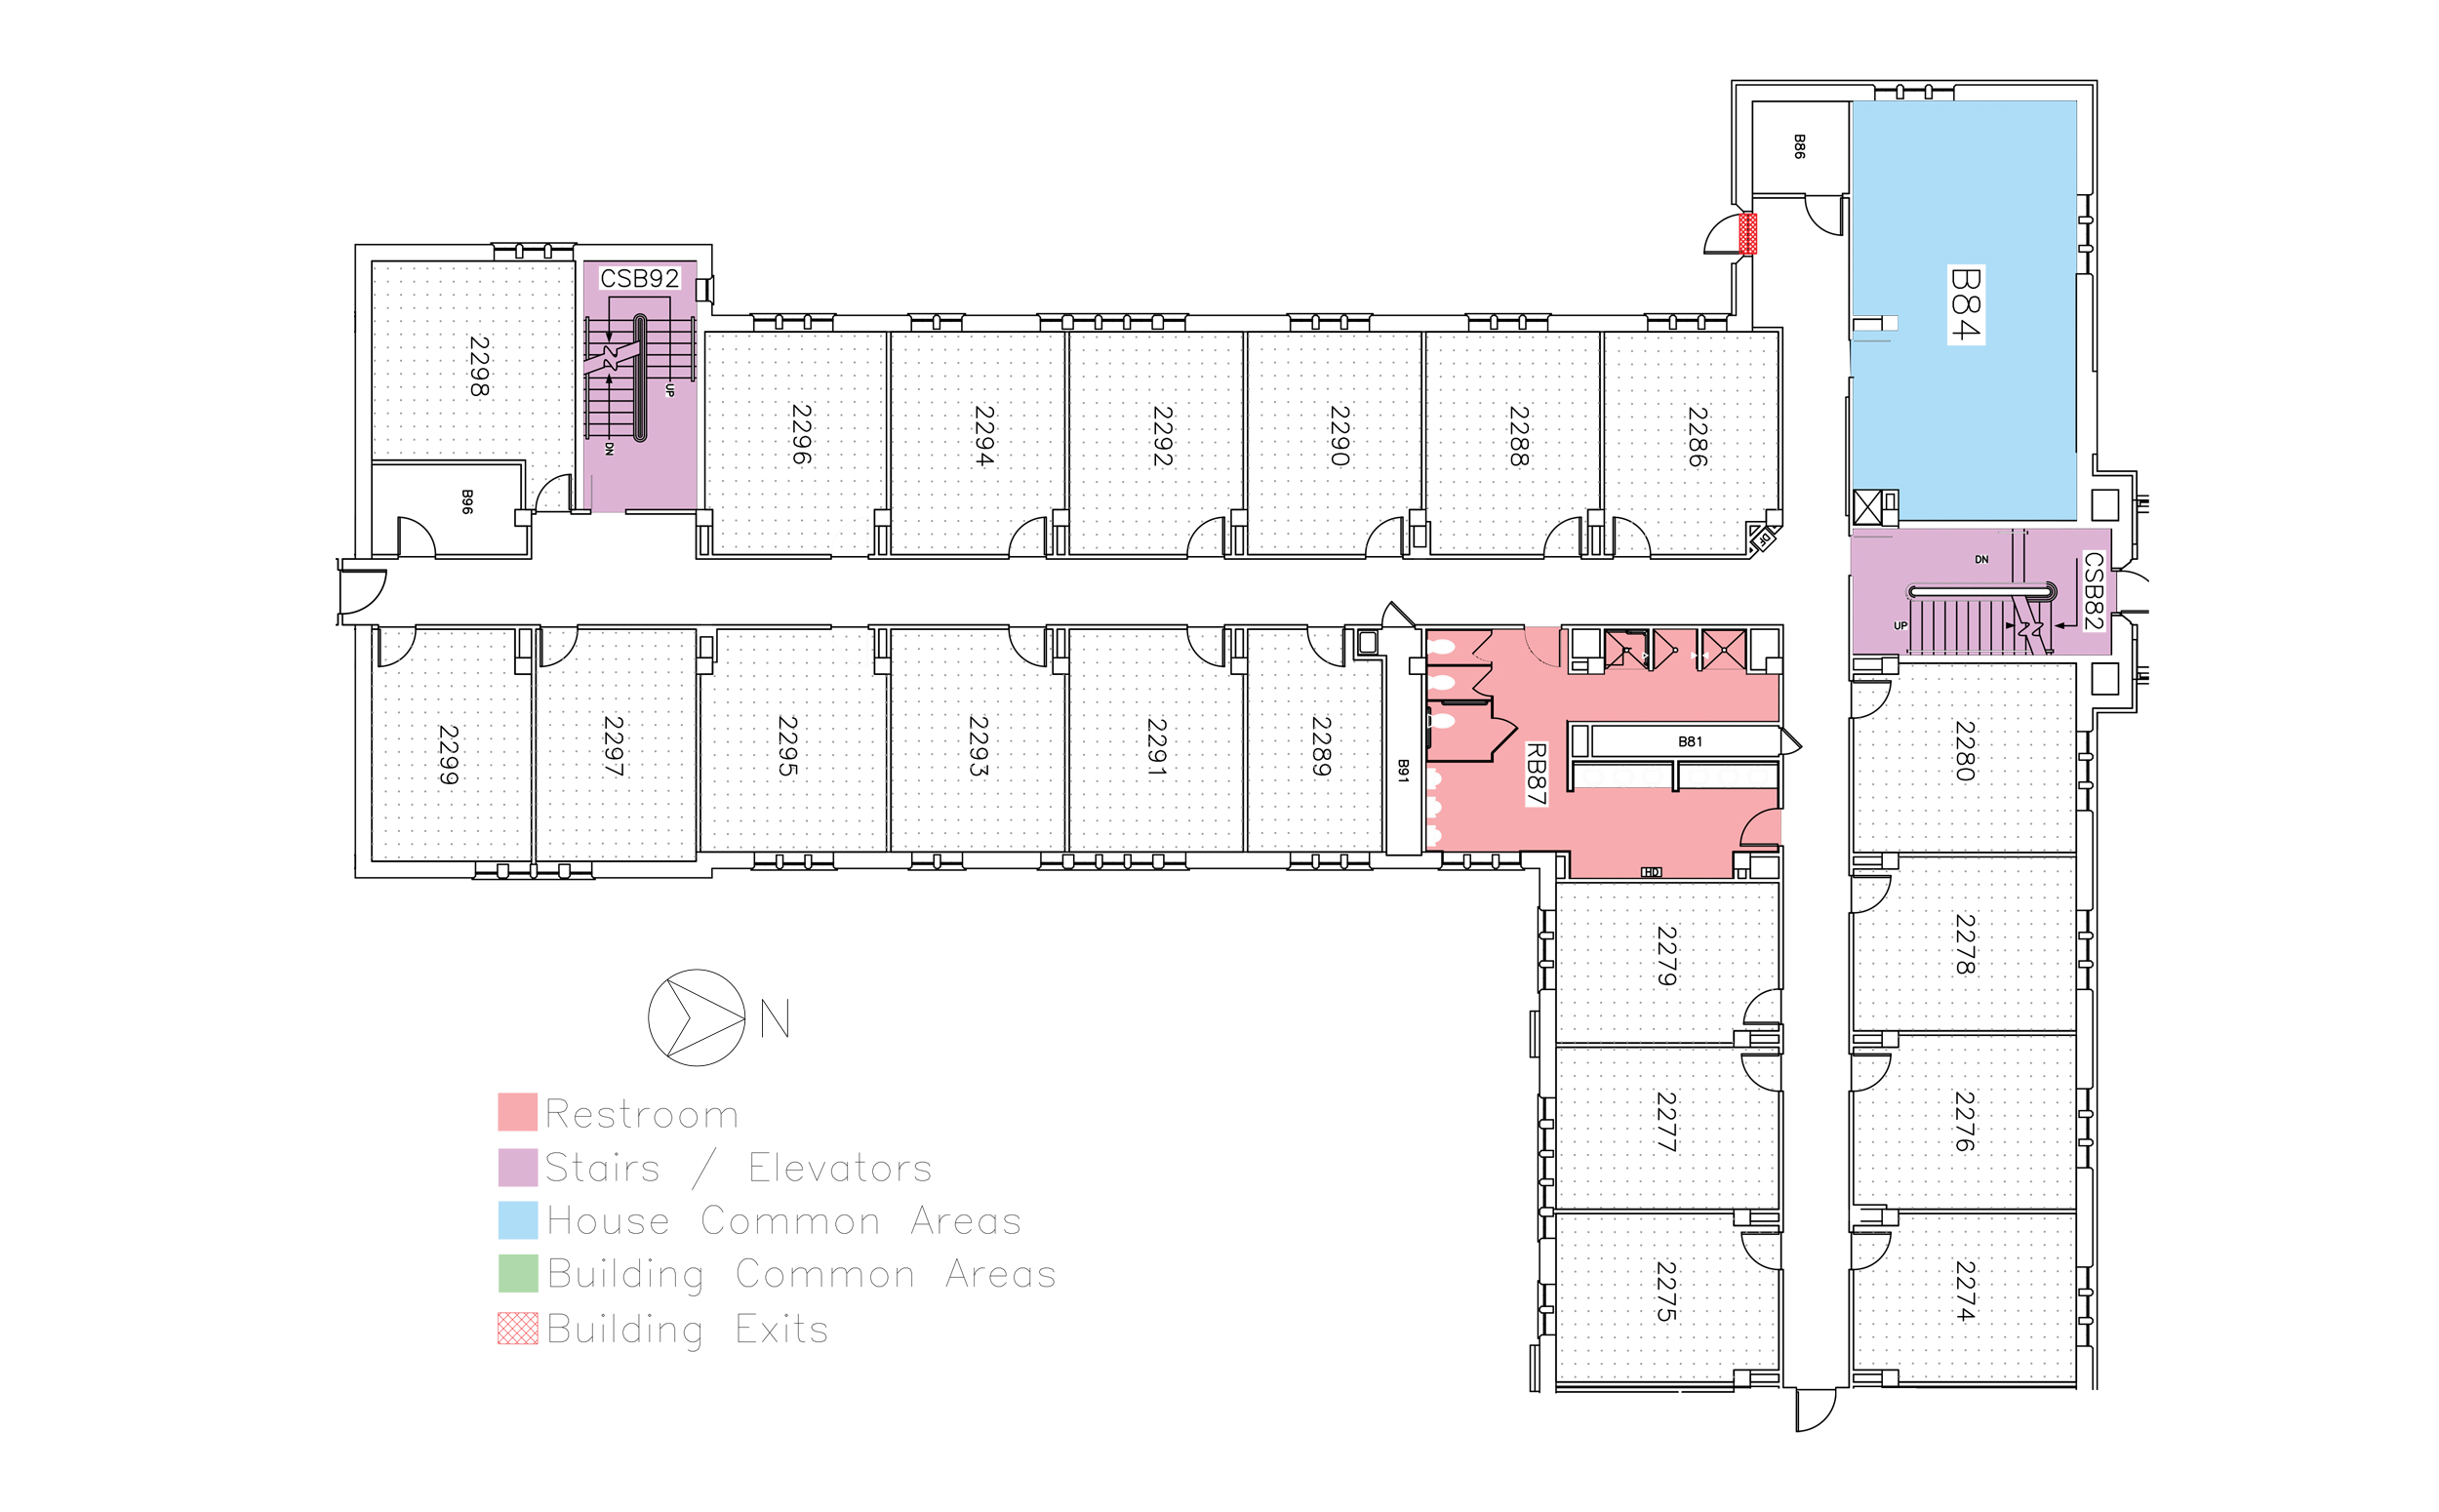 Stanton House, second floor in Friley Hall floor plan. Identifies the location of rooms, bathrooms and common space.